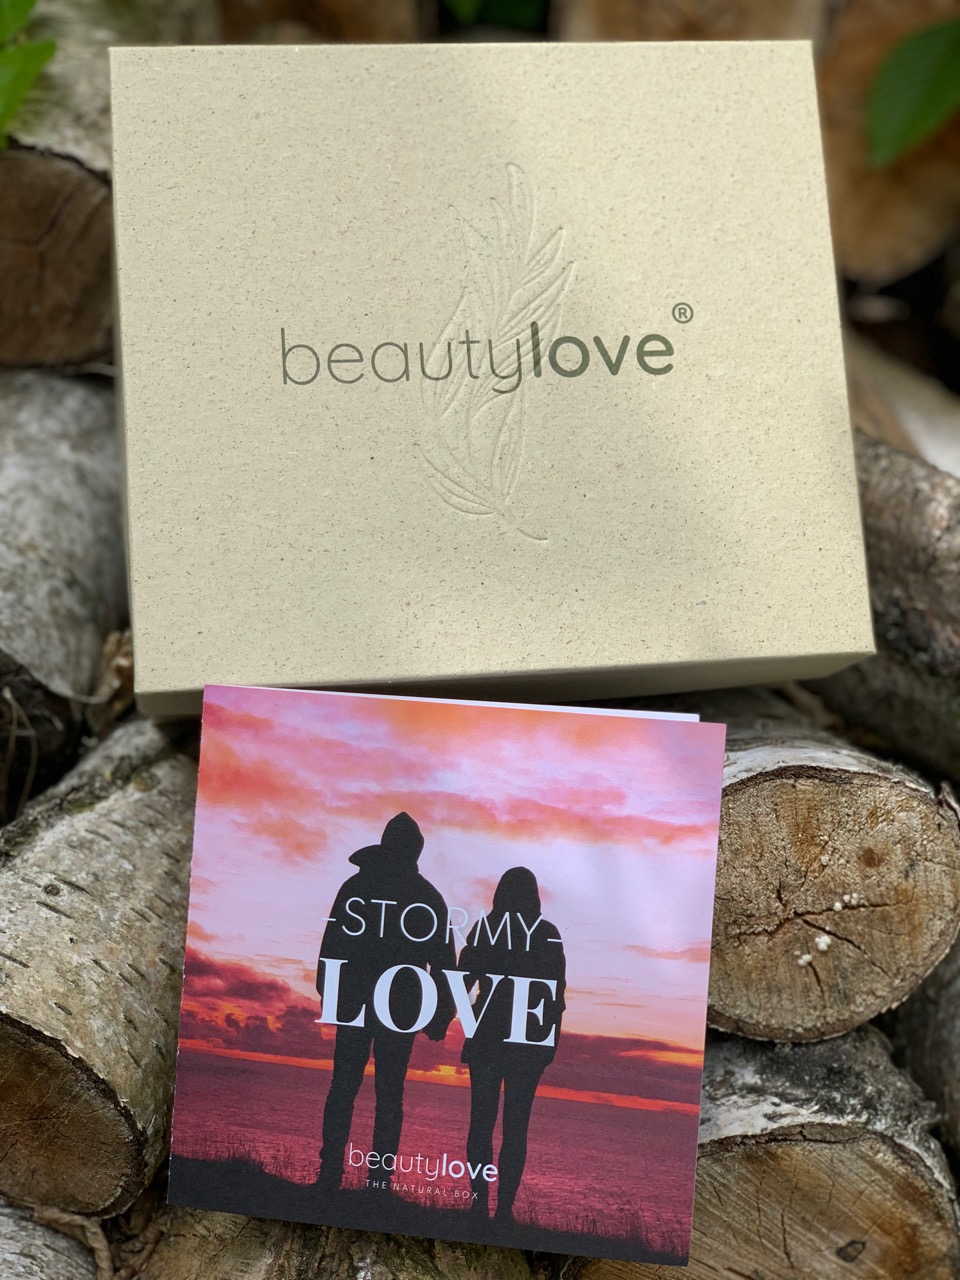 beautylove THE NATURAL BOX – Stormy love